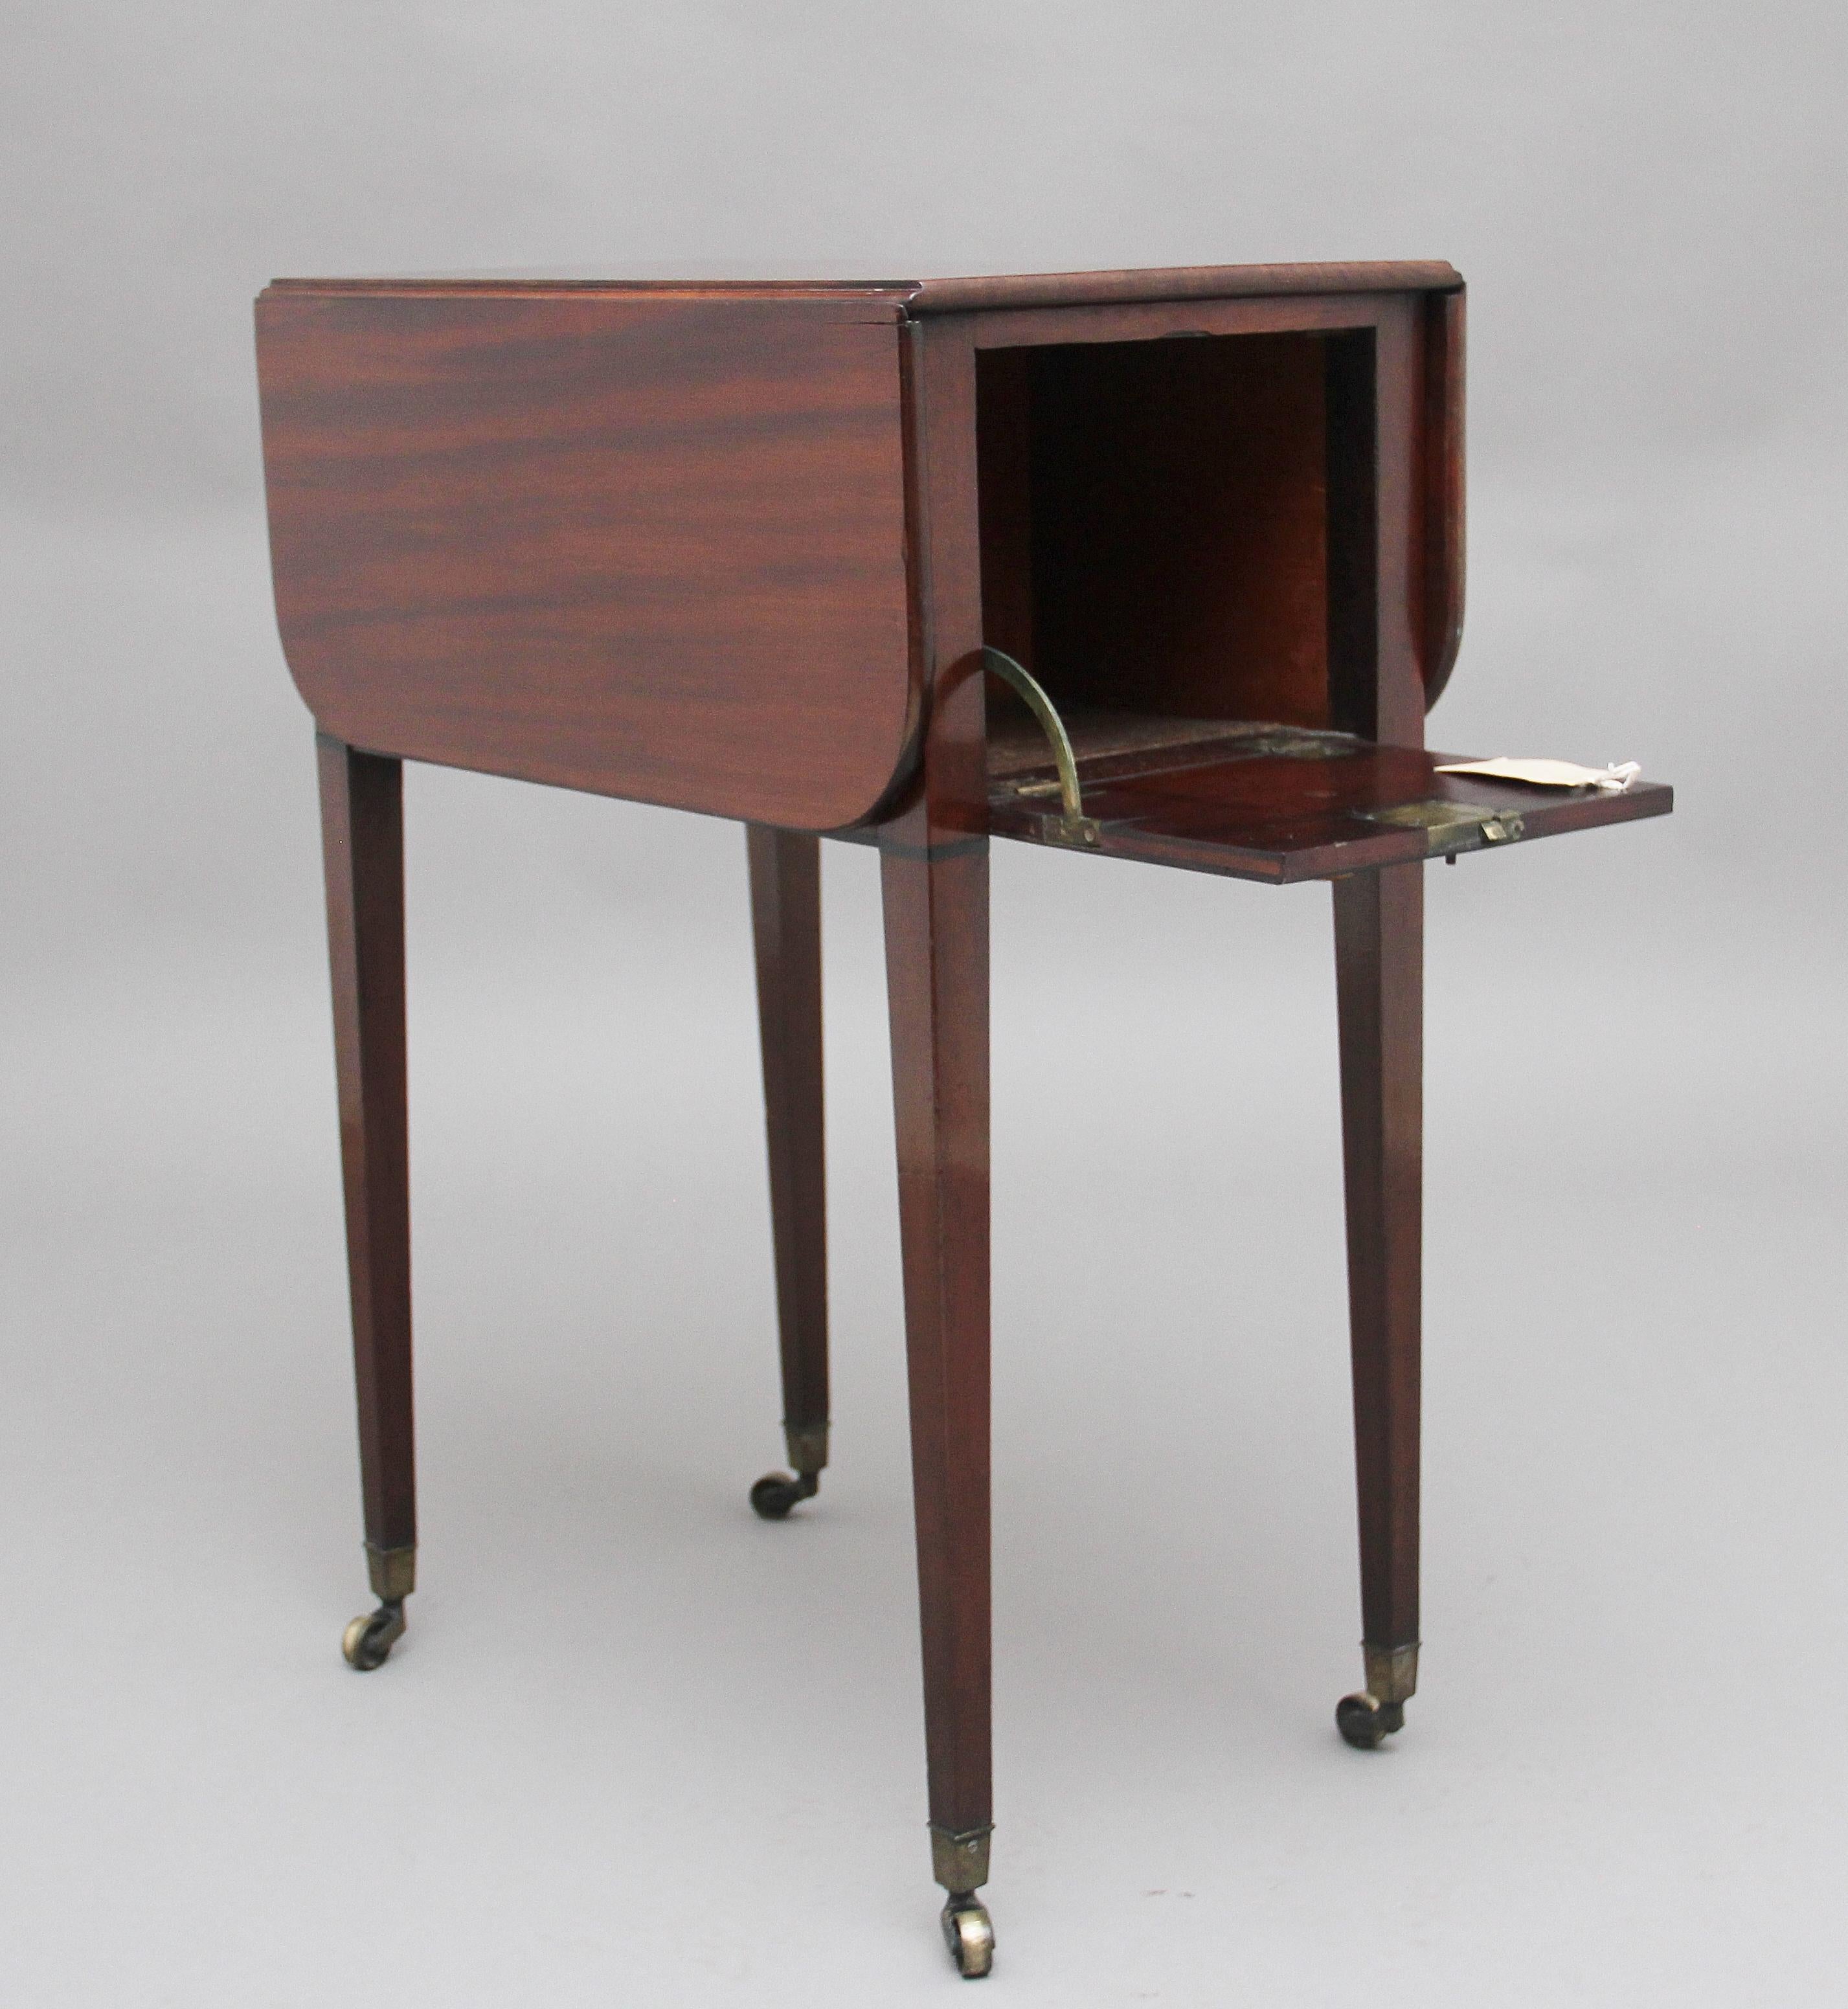 Early 19th century mahogany Pembroke table of nice proportions, the rounded edge drop leaf top above a hinged flap that drops down to reveal a compartment, this is the same on both ends of the table, supported on square tapering legs terminating on